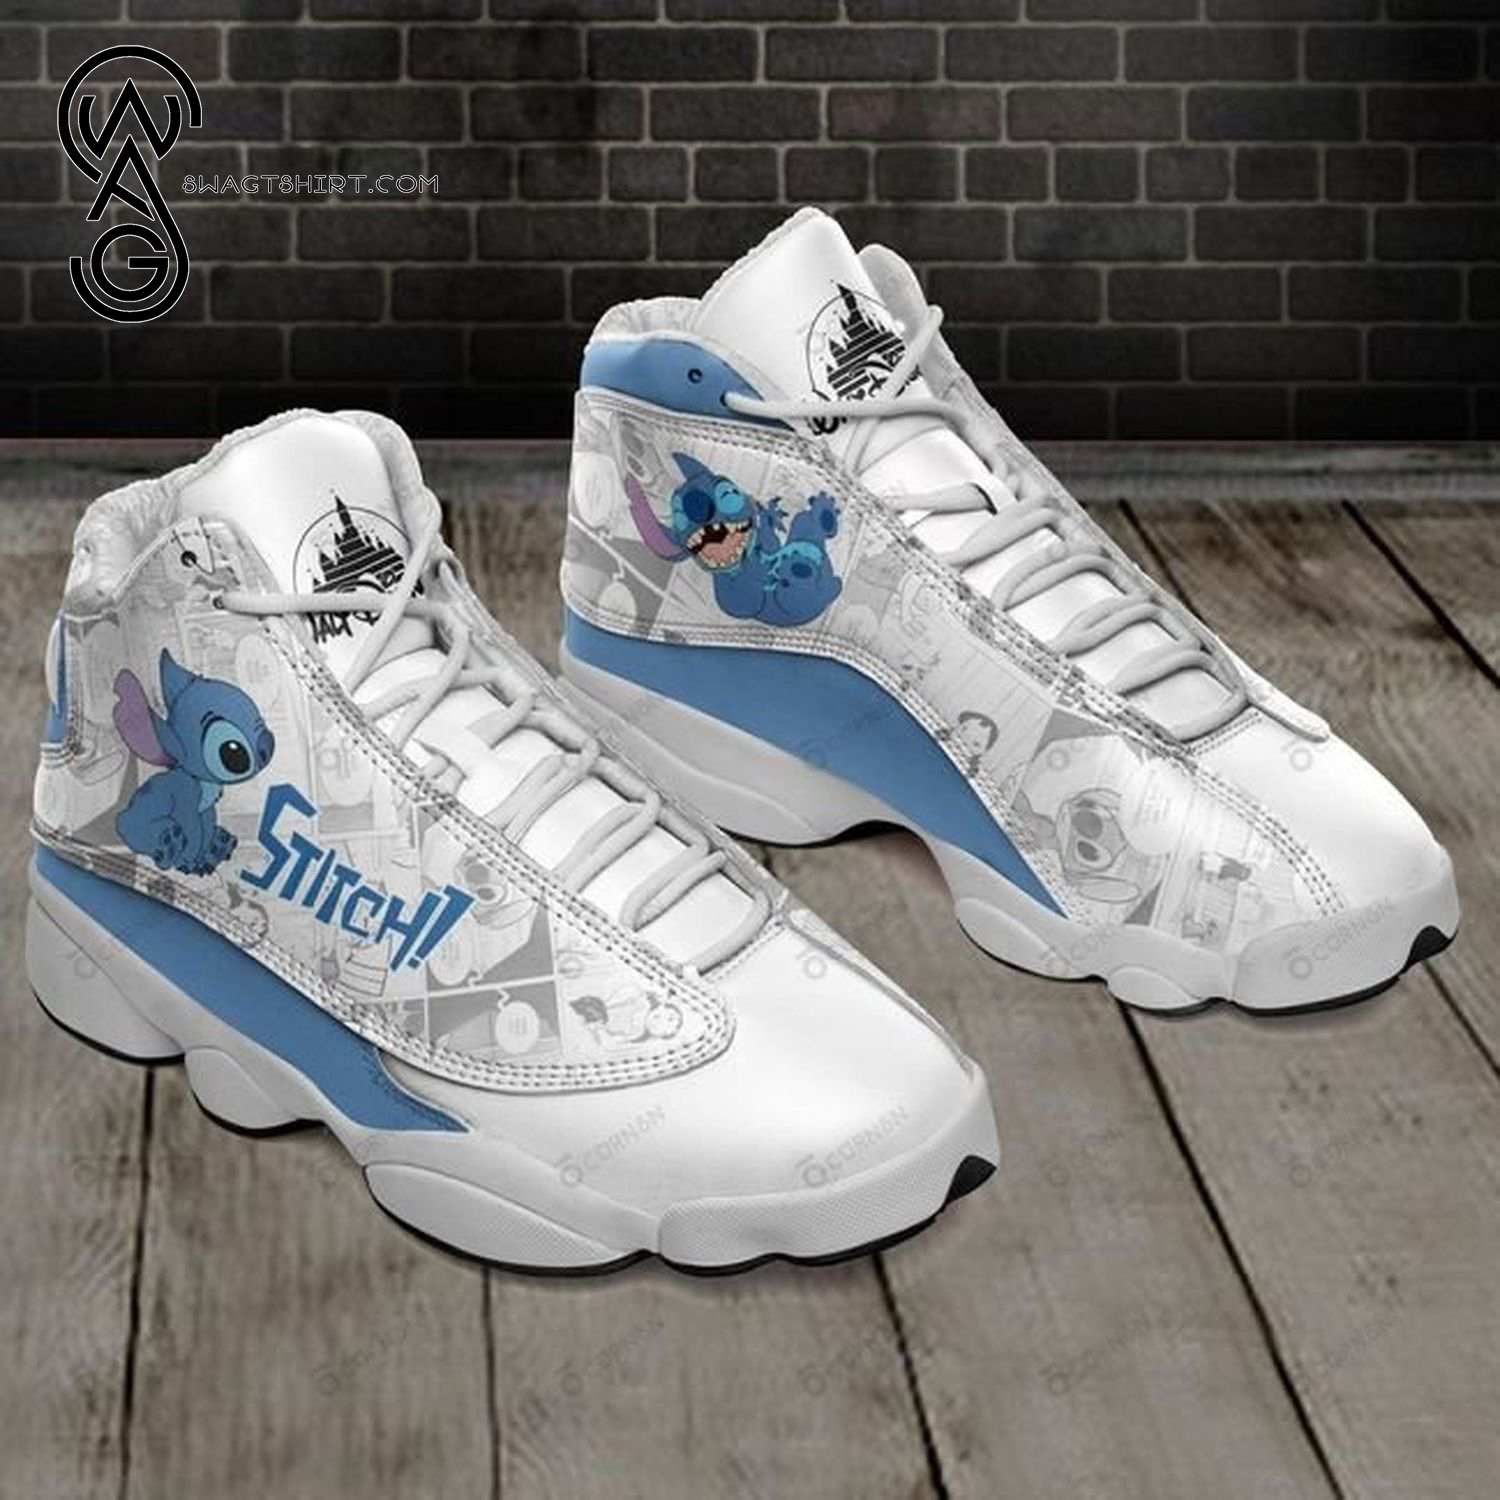 Lilo And Stitch Air Jordan 13 Shoes